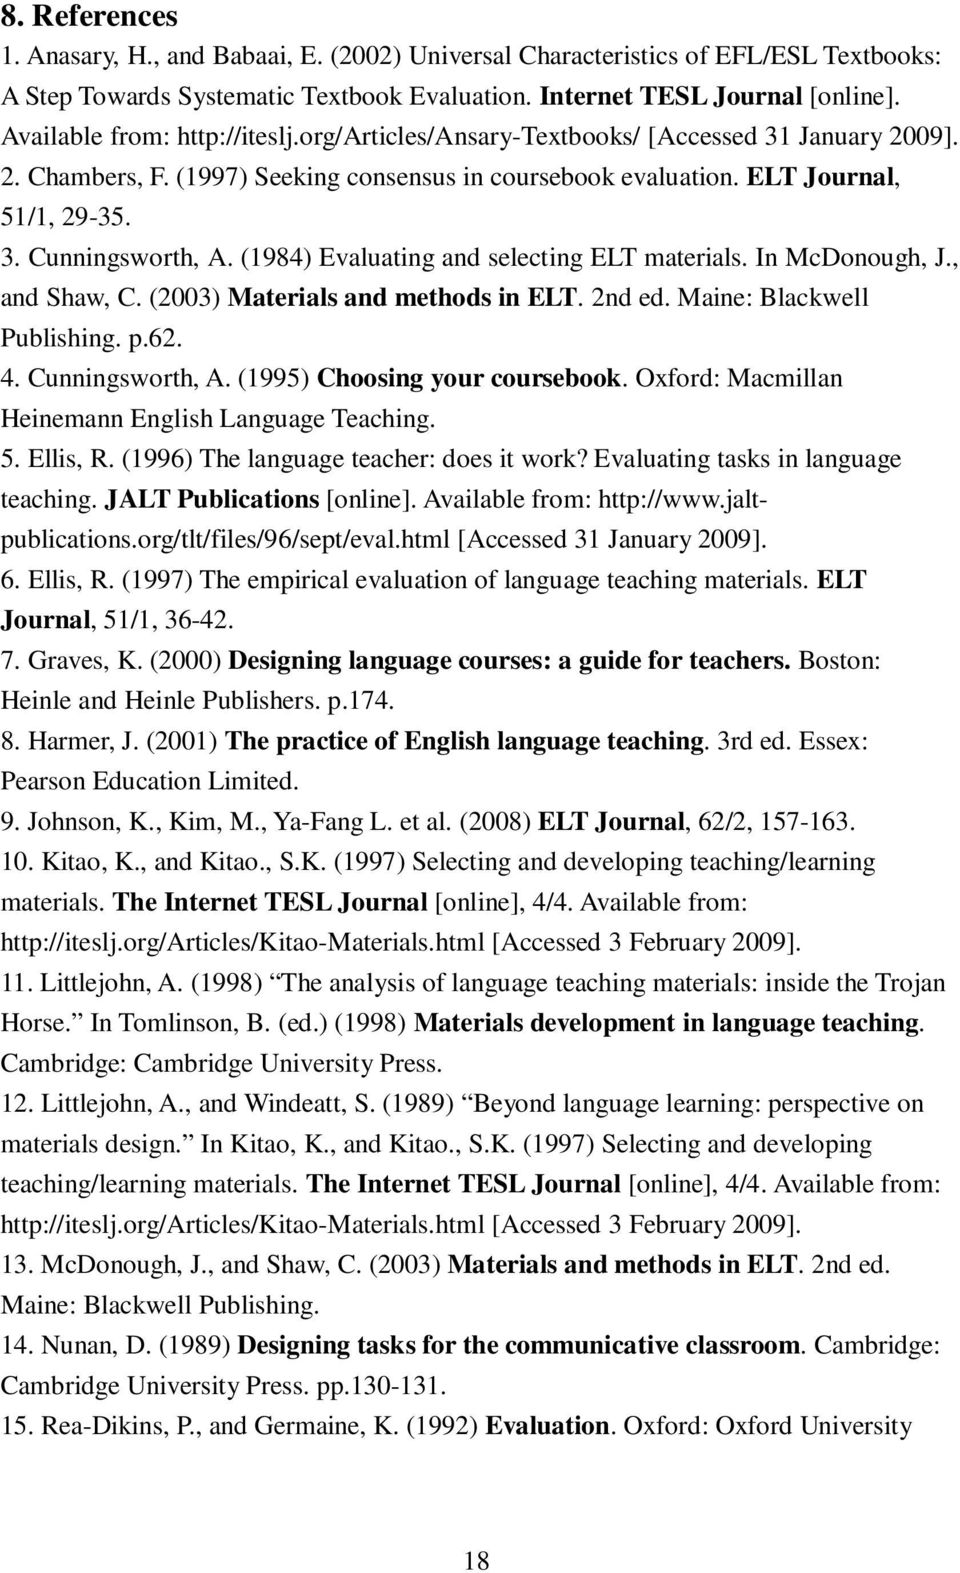 (1984) Evaluating and selecting ELT materials. In McDonough, J., and Shaw, C. (2003) Materials and methods in ELT. 2nd ed. Maine: Blackwell Publishing. p.62. 4. Cunningsworth, A.